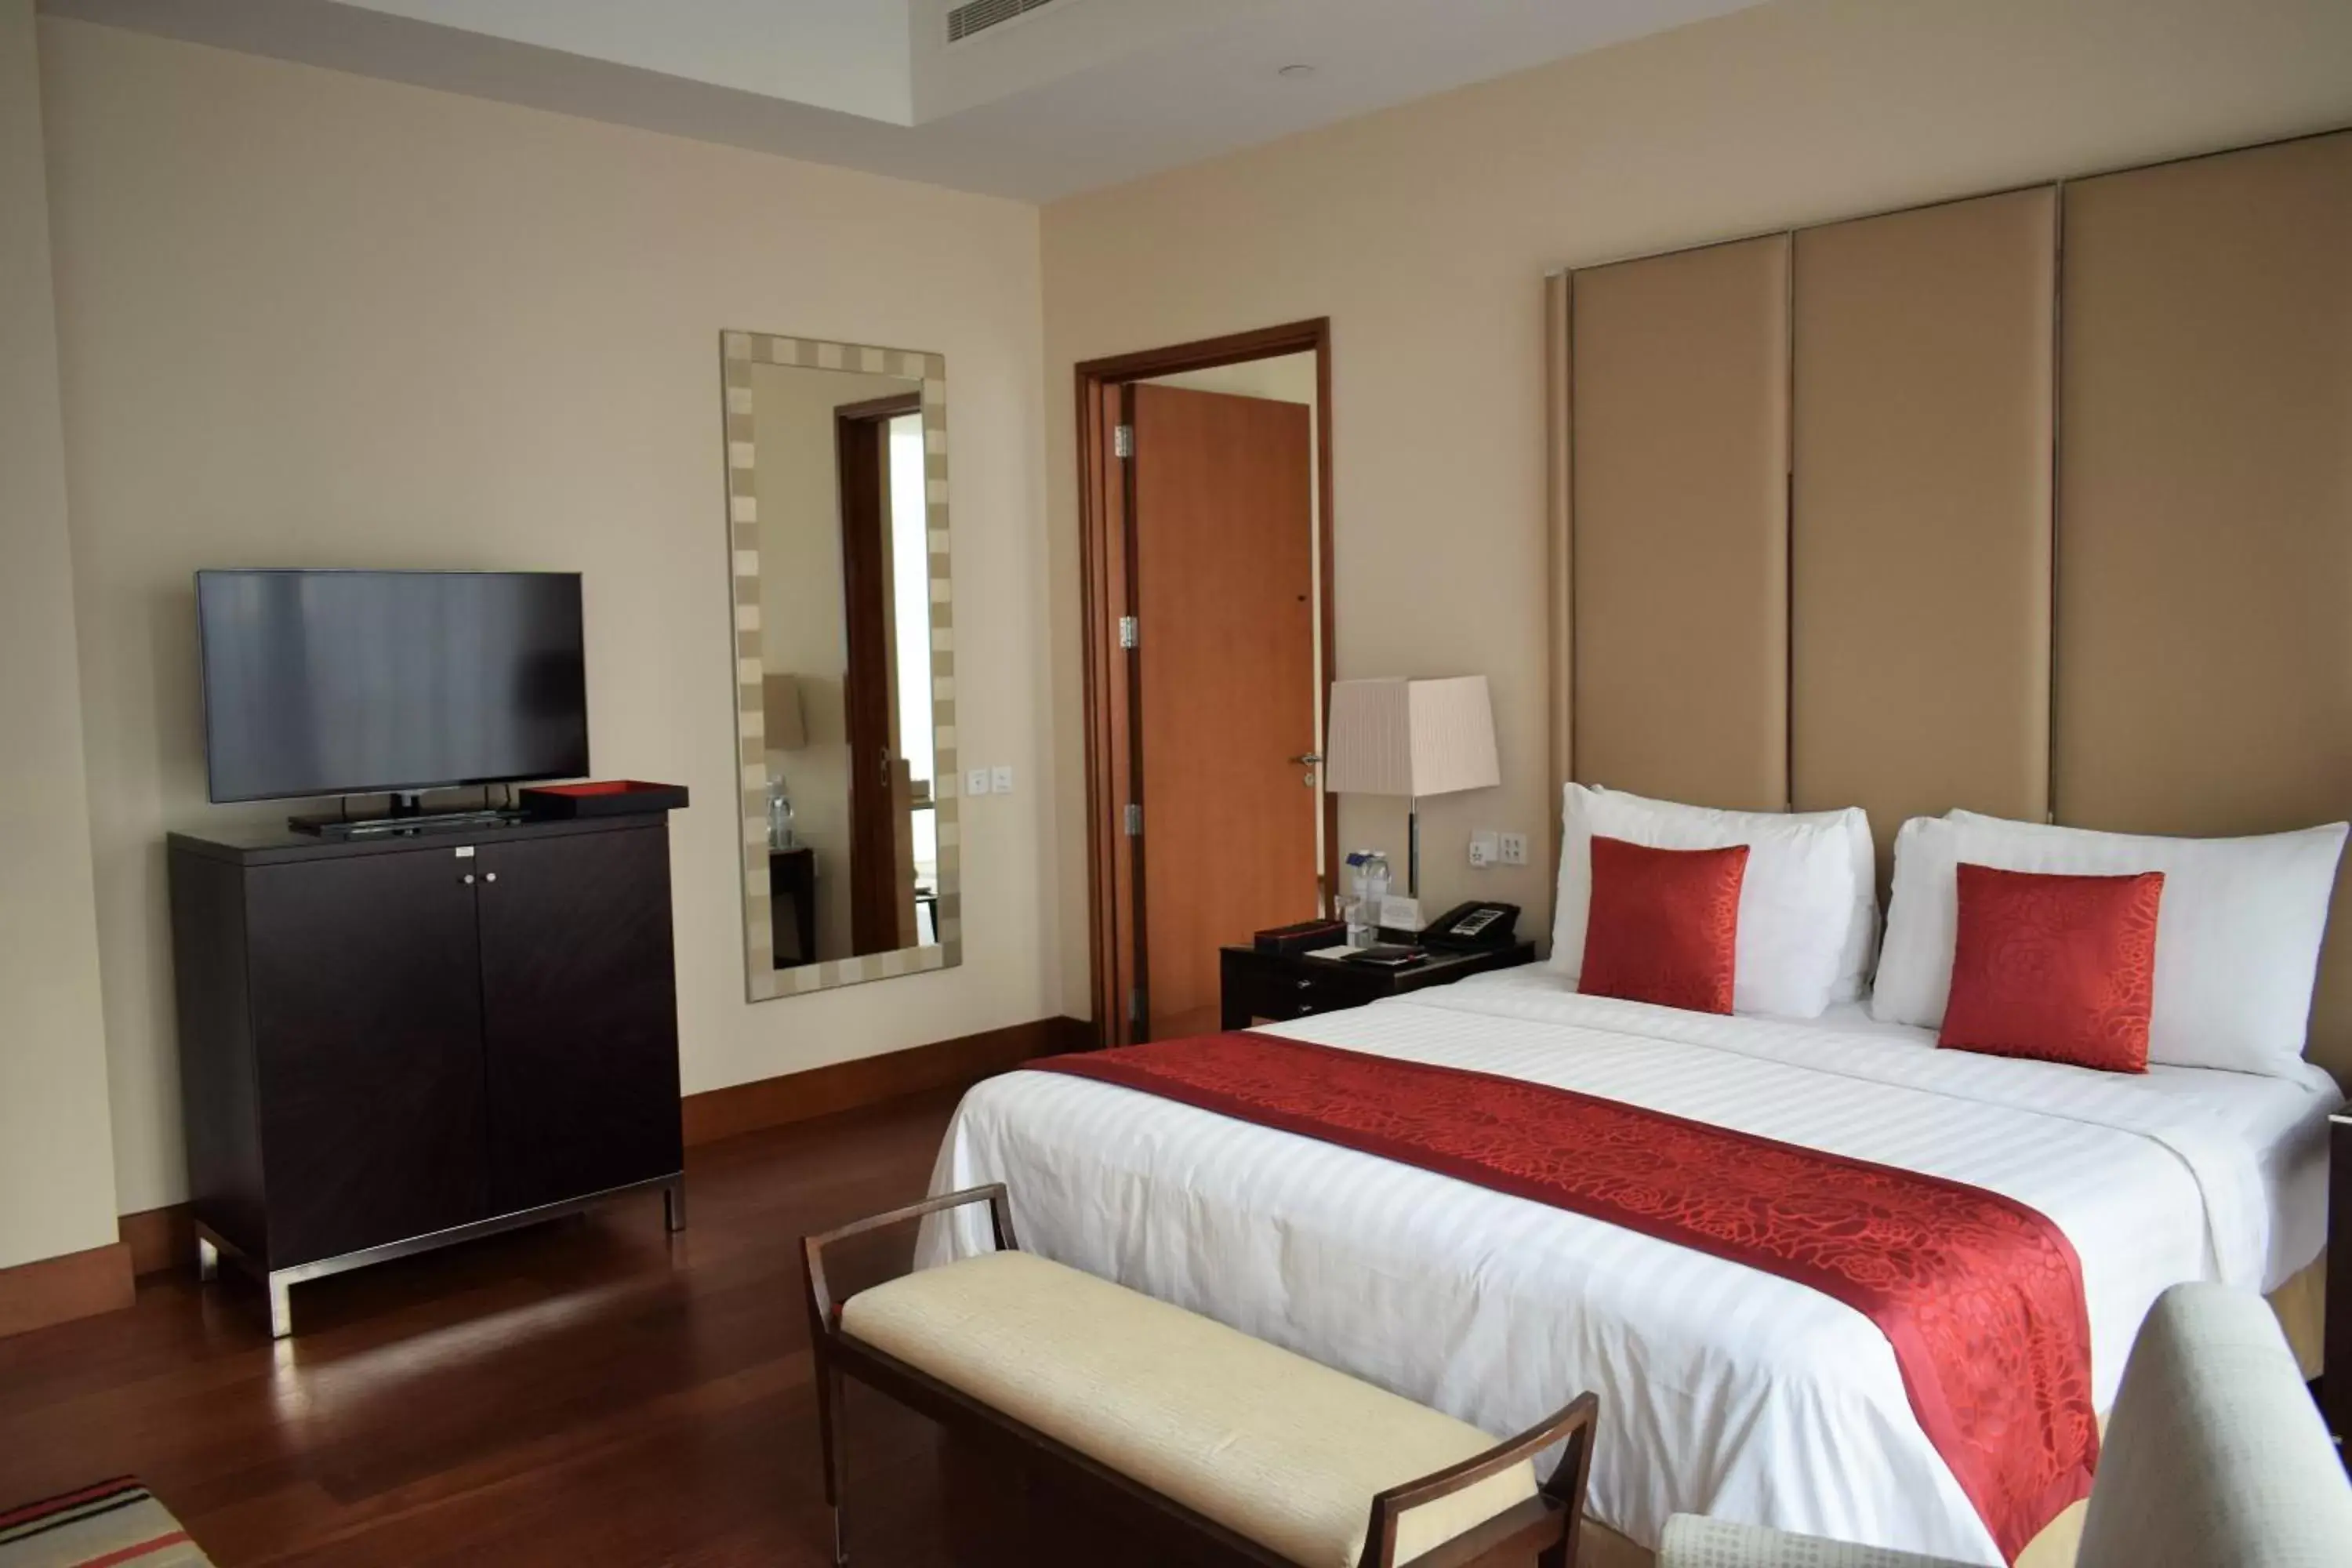 Facility for disabled guests, Bed in Anantara Downtown Dubai